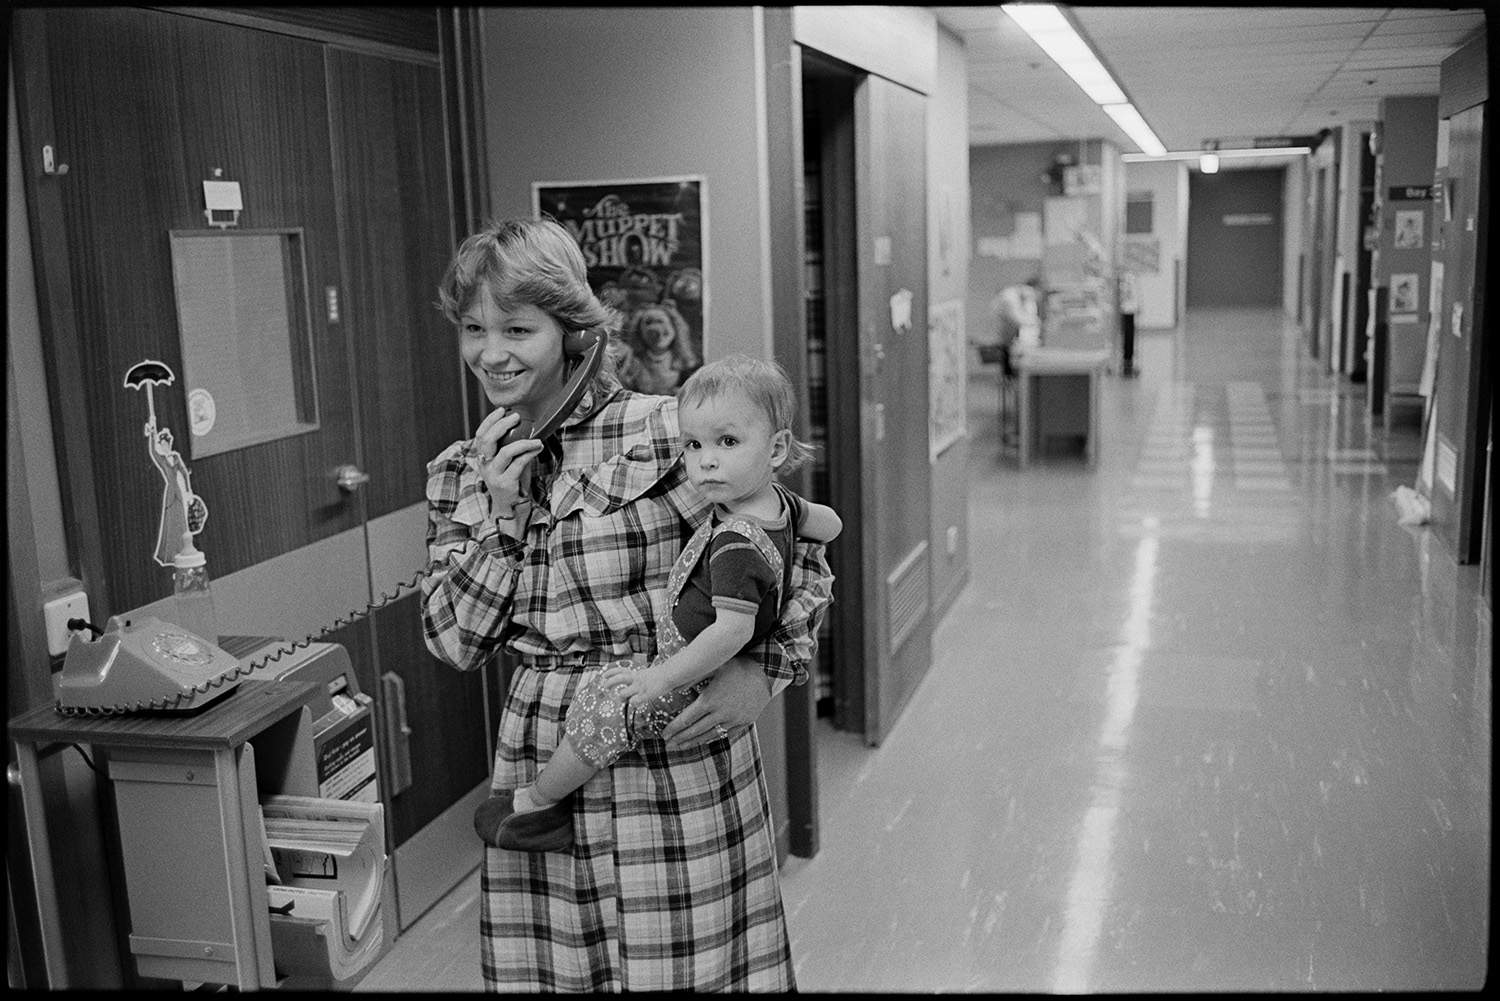 Hospital children's ward, women mothers with children in wards. Woman on telephone. 
[A woman holding a baby making a telephone call from the children's ward at Barnstaple General Hospital. The ward can be seen in the background and a poster advertising The Muppet Show is pinned to the wall behind her.]